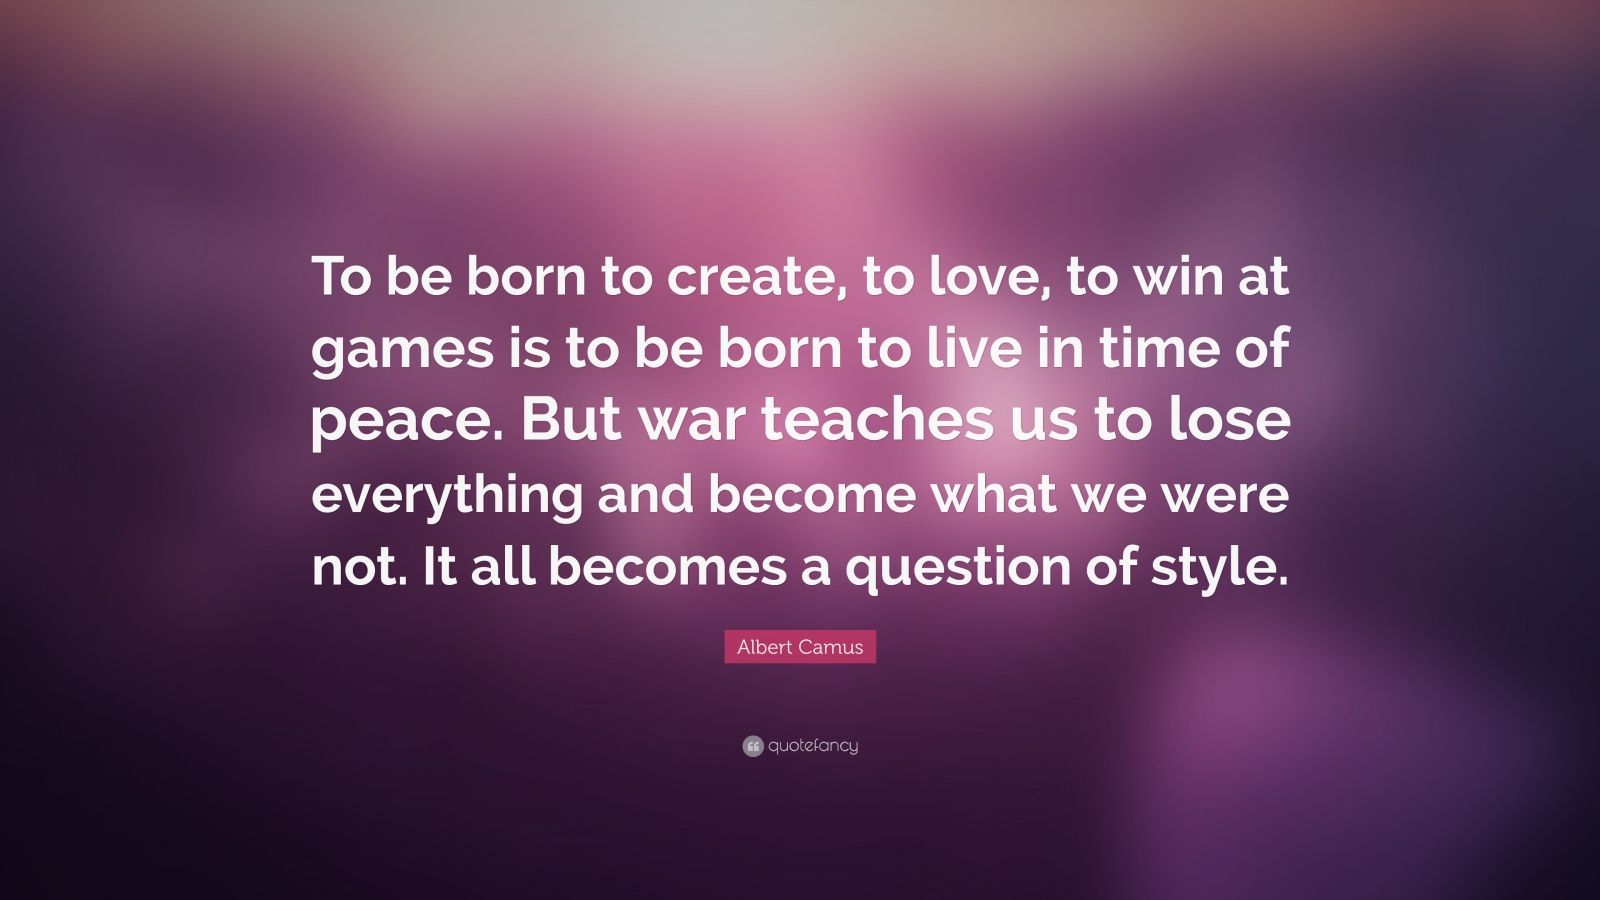 Albert Camus Quote “To be born to create to love to win